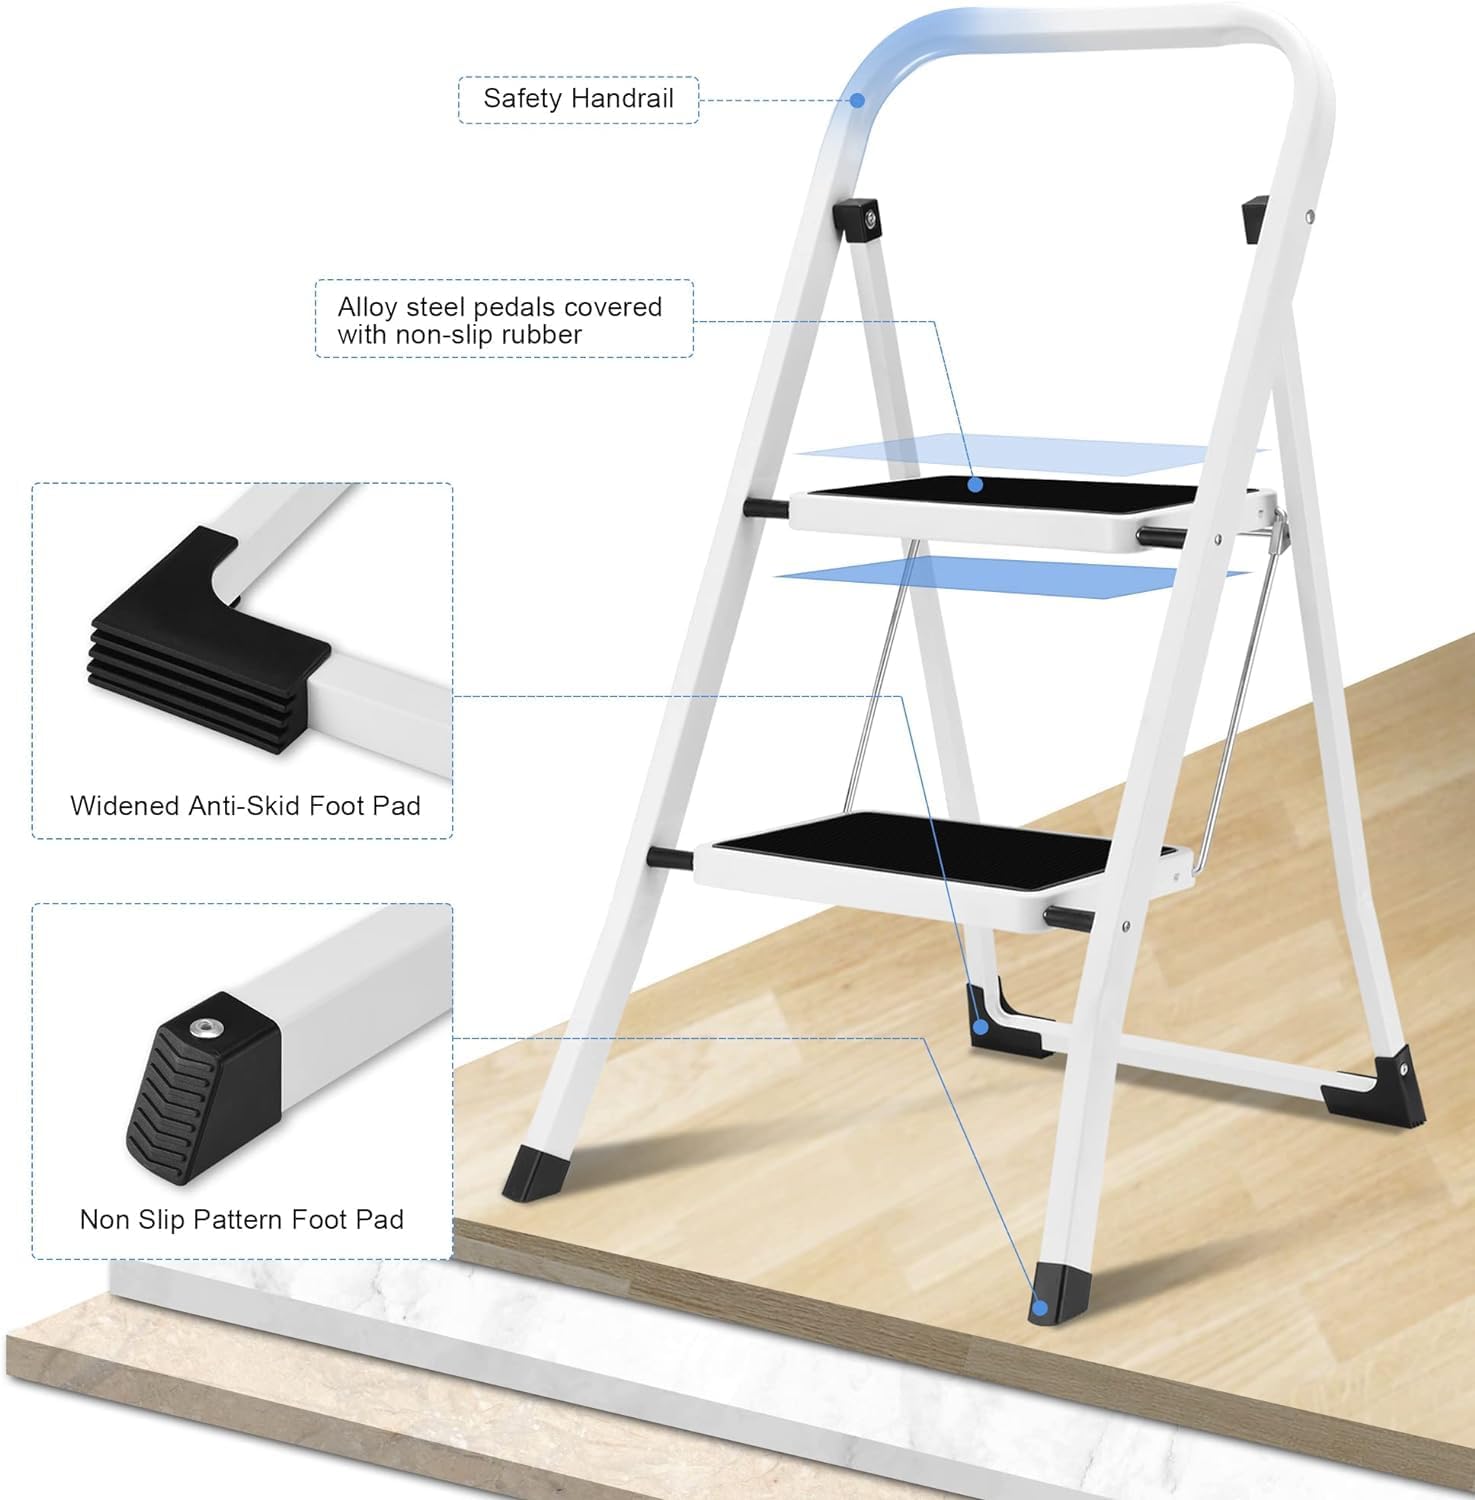 Lightweight Folding Step Stools with Anti-Slip Pedal - 330lbs Capacity (2 or 3 Step)